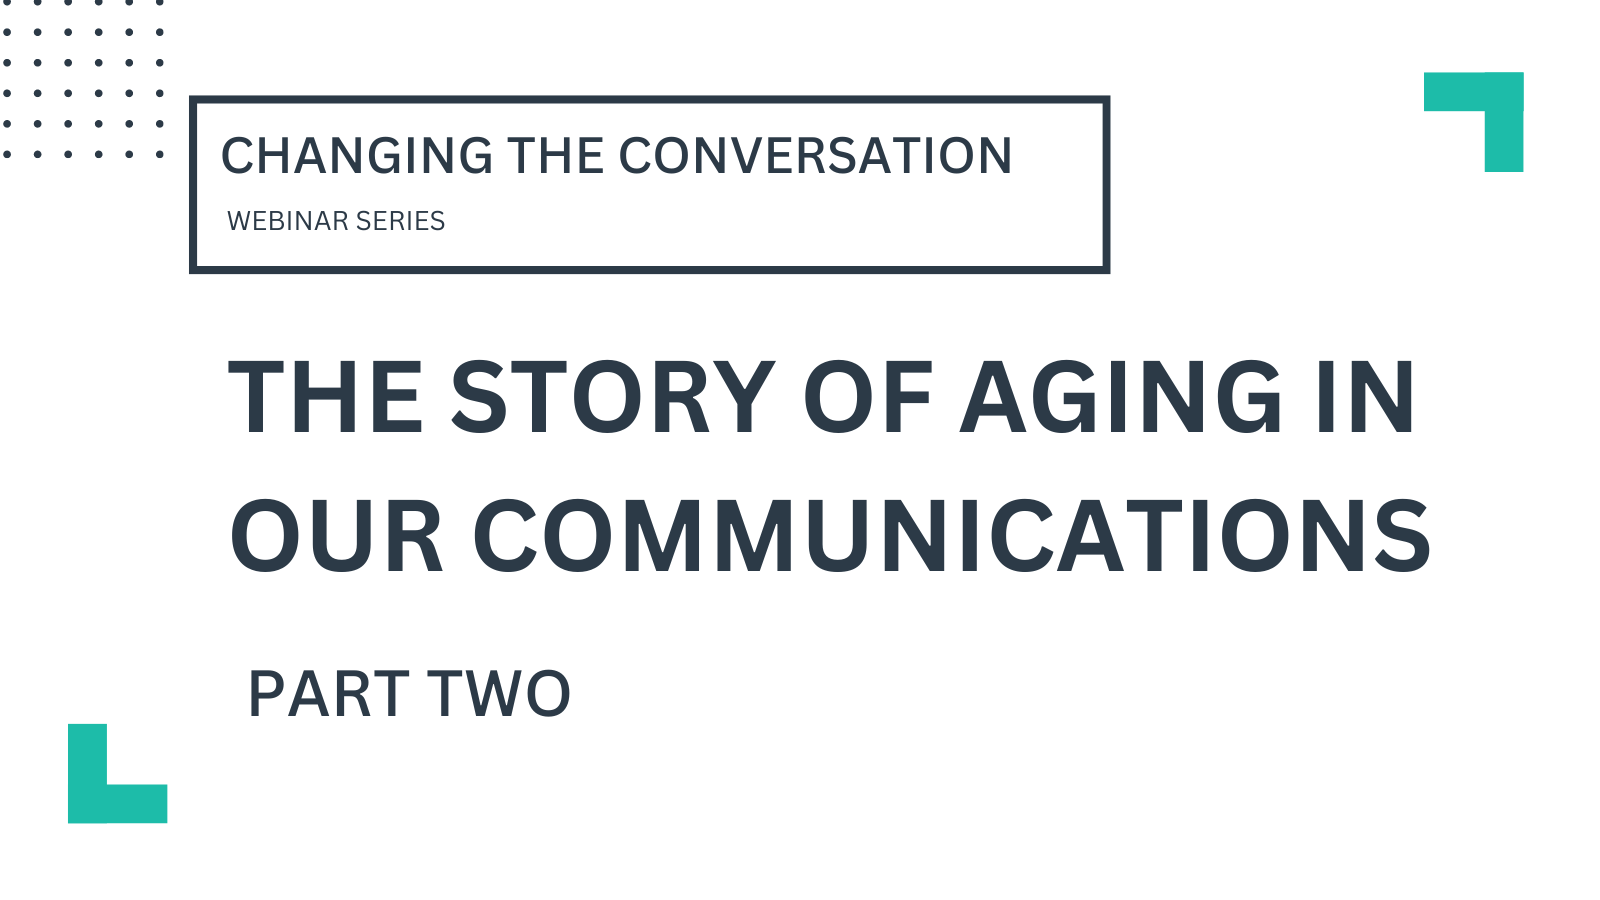 Changing the Conversation Topic: The Story of Aging in our Communications